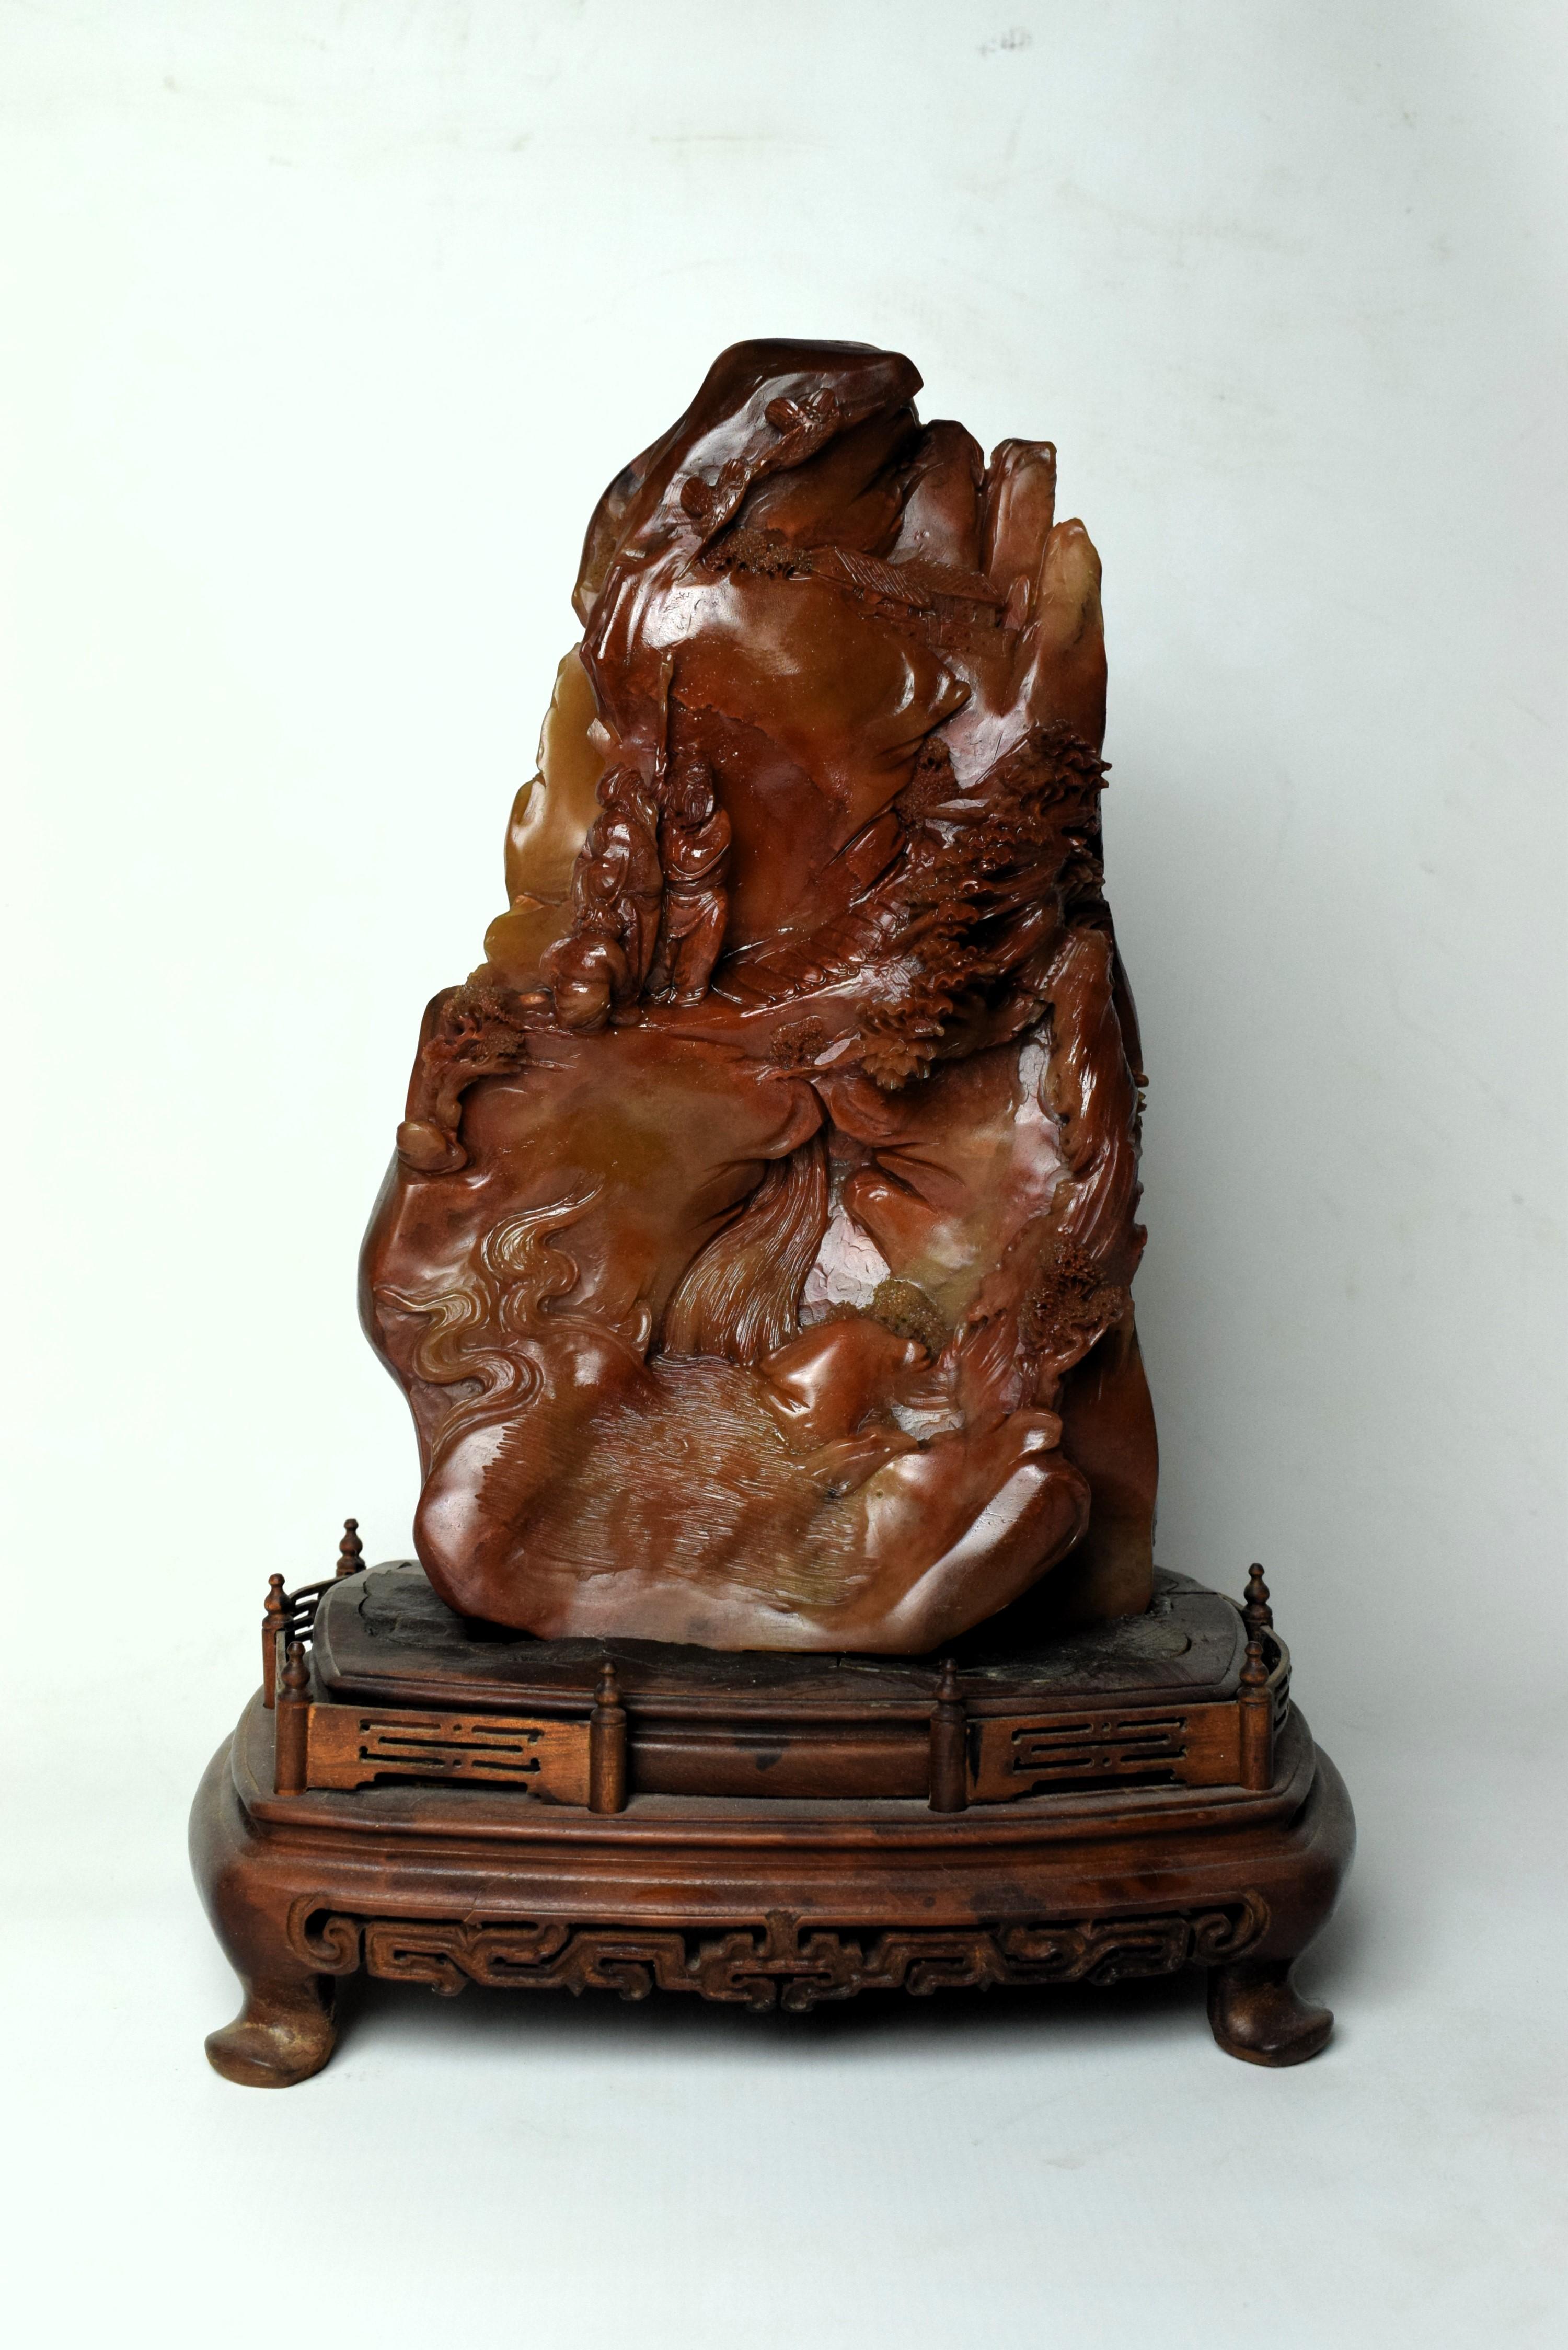 The finely detailed Chinese soapstone carving from the 20th century portrays a picturesque mountain village nestled in a serene landscape. Crafted with exquisite precision, the carving captures the essence of traditional Chinese rural life and the